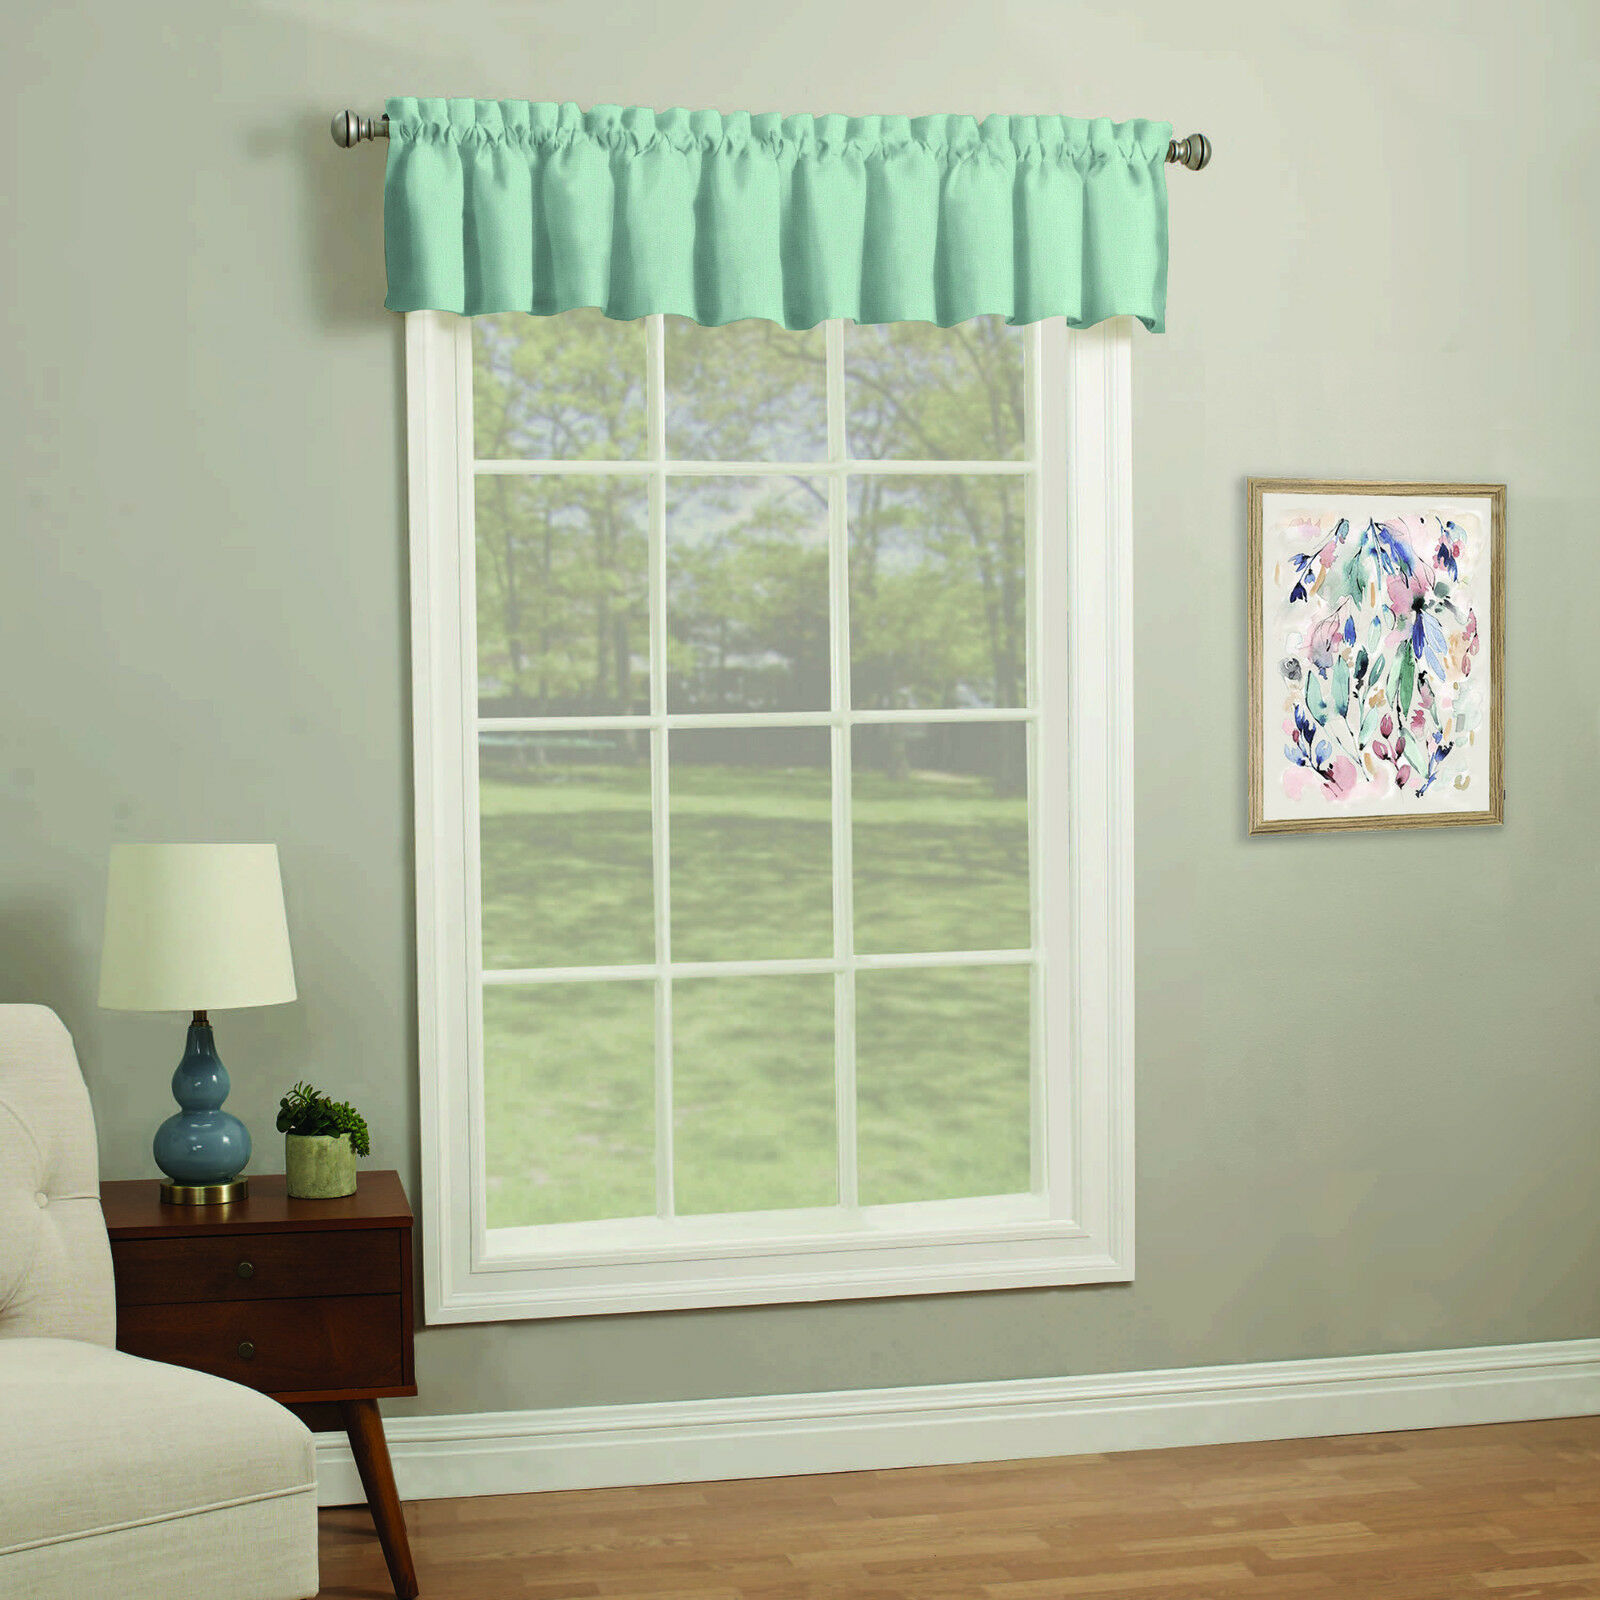 Home Solid Color Tailored Textured Window Valance, Aqua, Size: 56" W x 14" L - $10.39